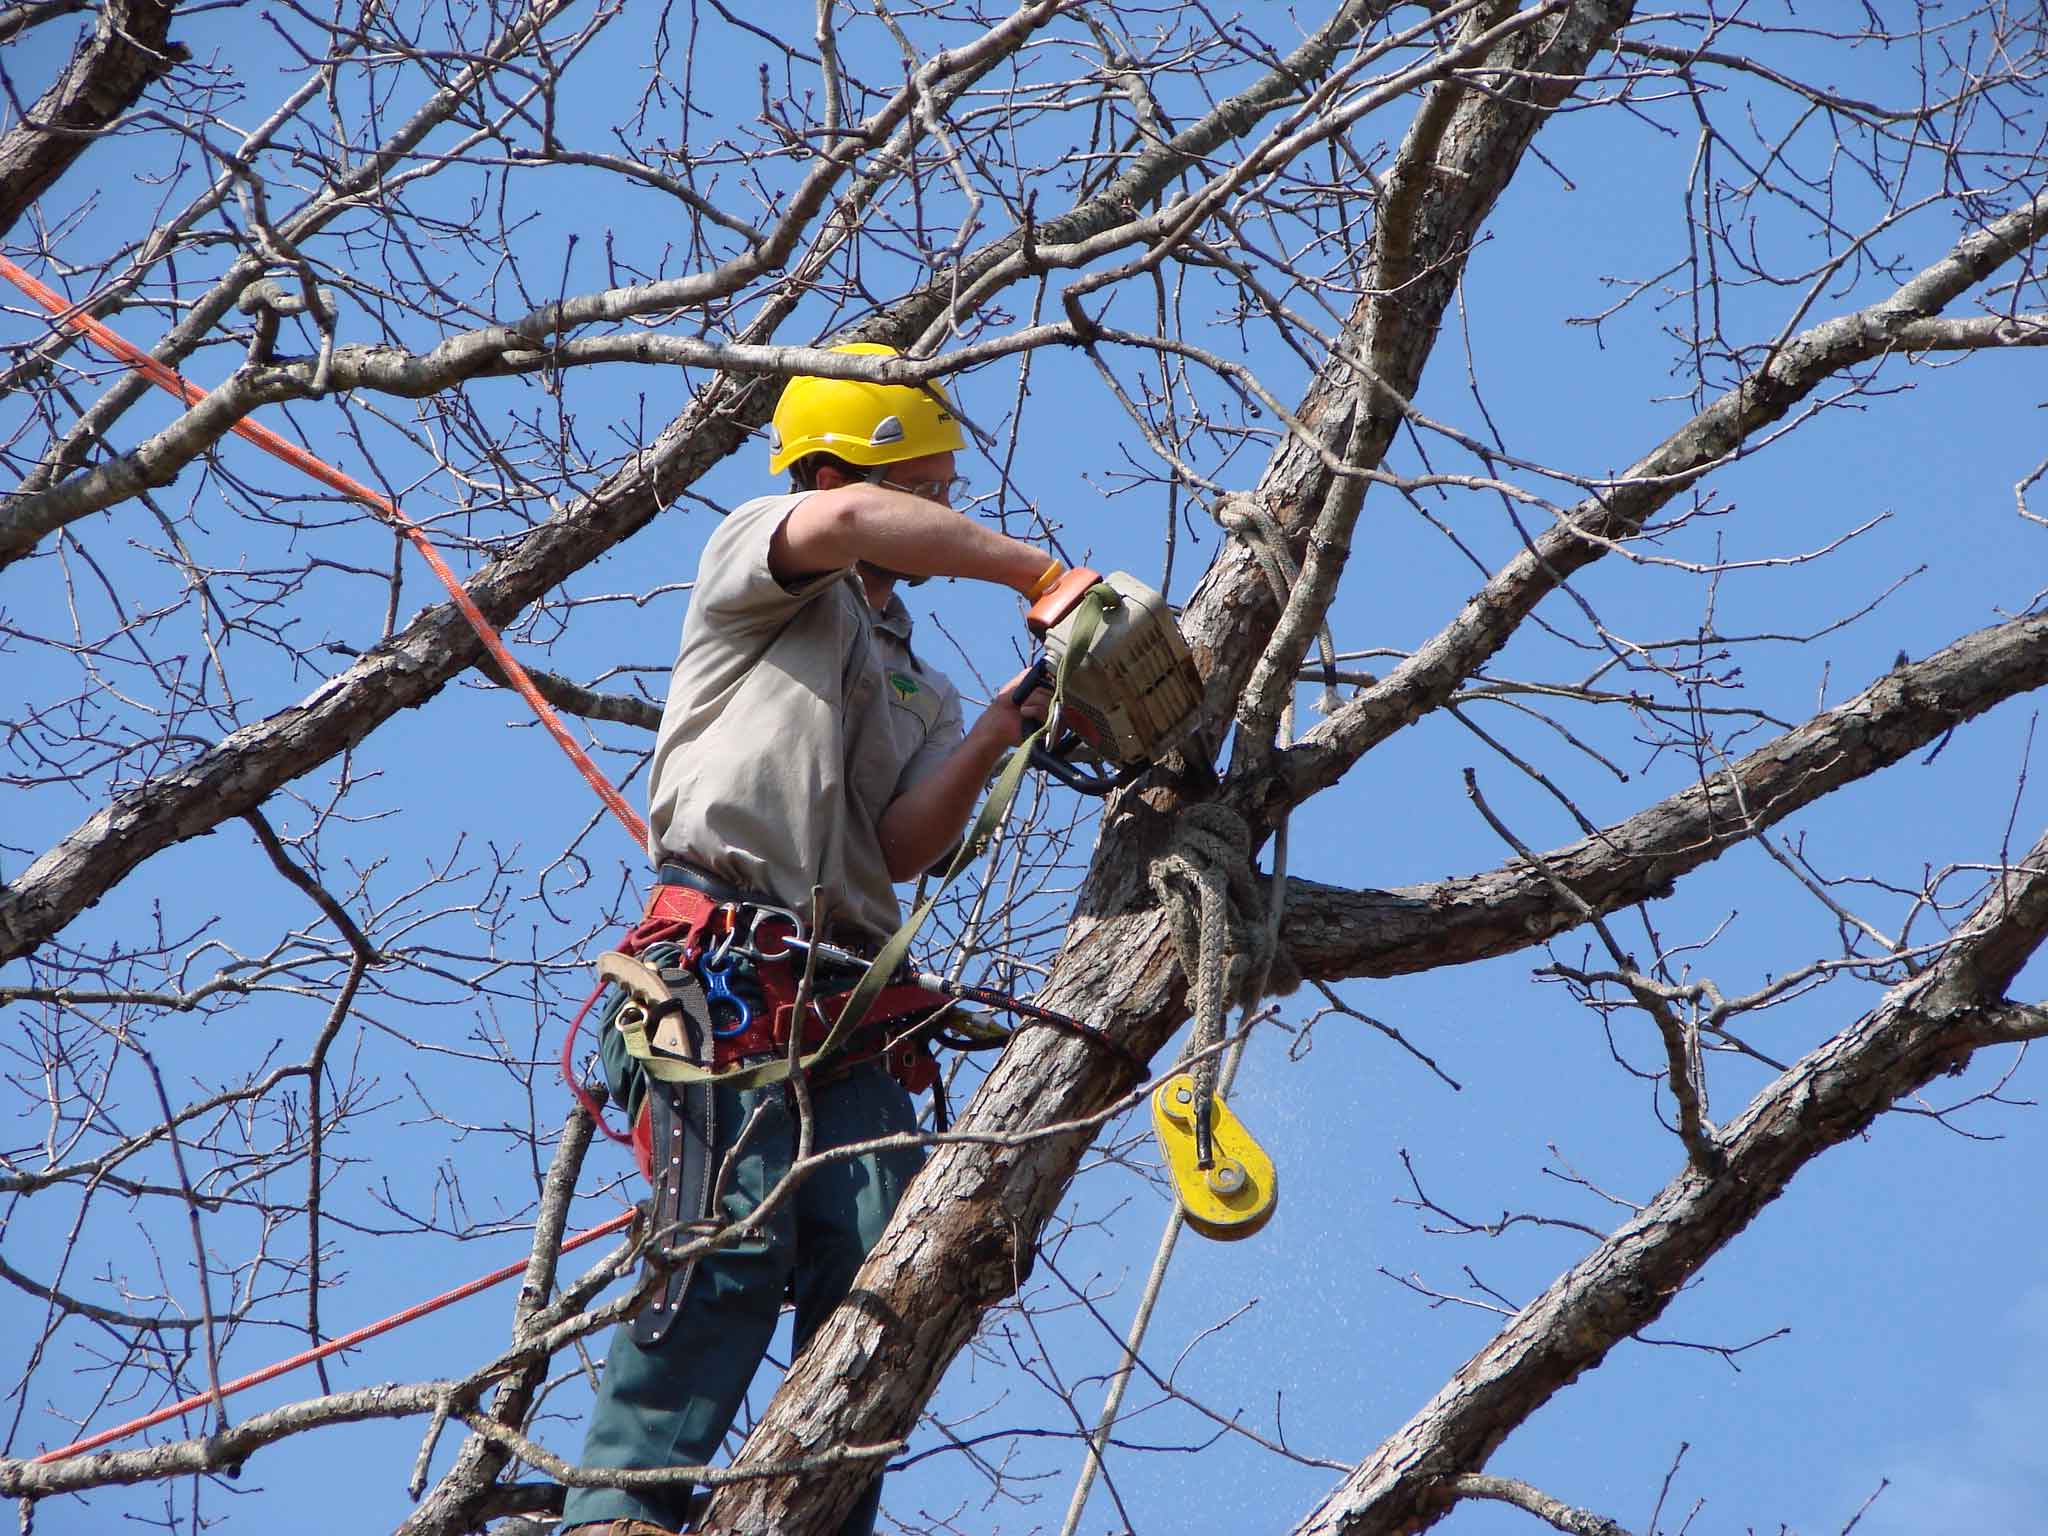 Tree Trimming Services-Palm Springs Tree Trimming and Tree Removal Services-We Offer Tree Trimming Services, Tree Removal, Tree Pruning, Tree Cutting, Residential and Commercial Tree Trimming Services, Storm Damage, Emergency Tree Removal, Land Clearing, Tree Companies, Tree Care Service, Stump Grinding, and we're the Best Tree Trimming Company Near You Guaranteed!